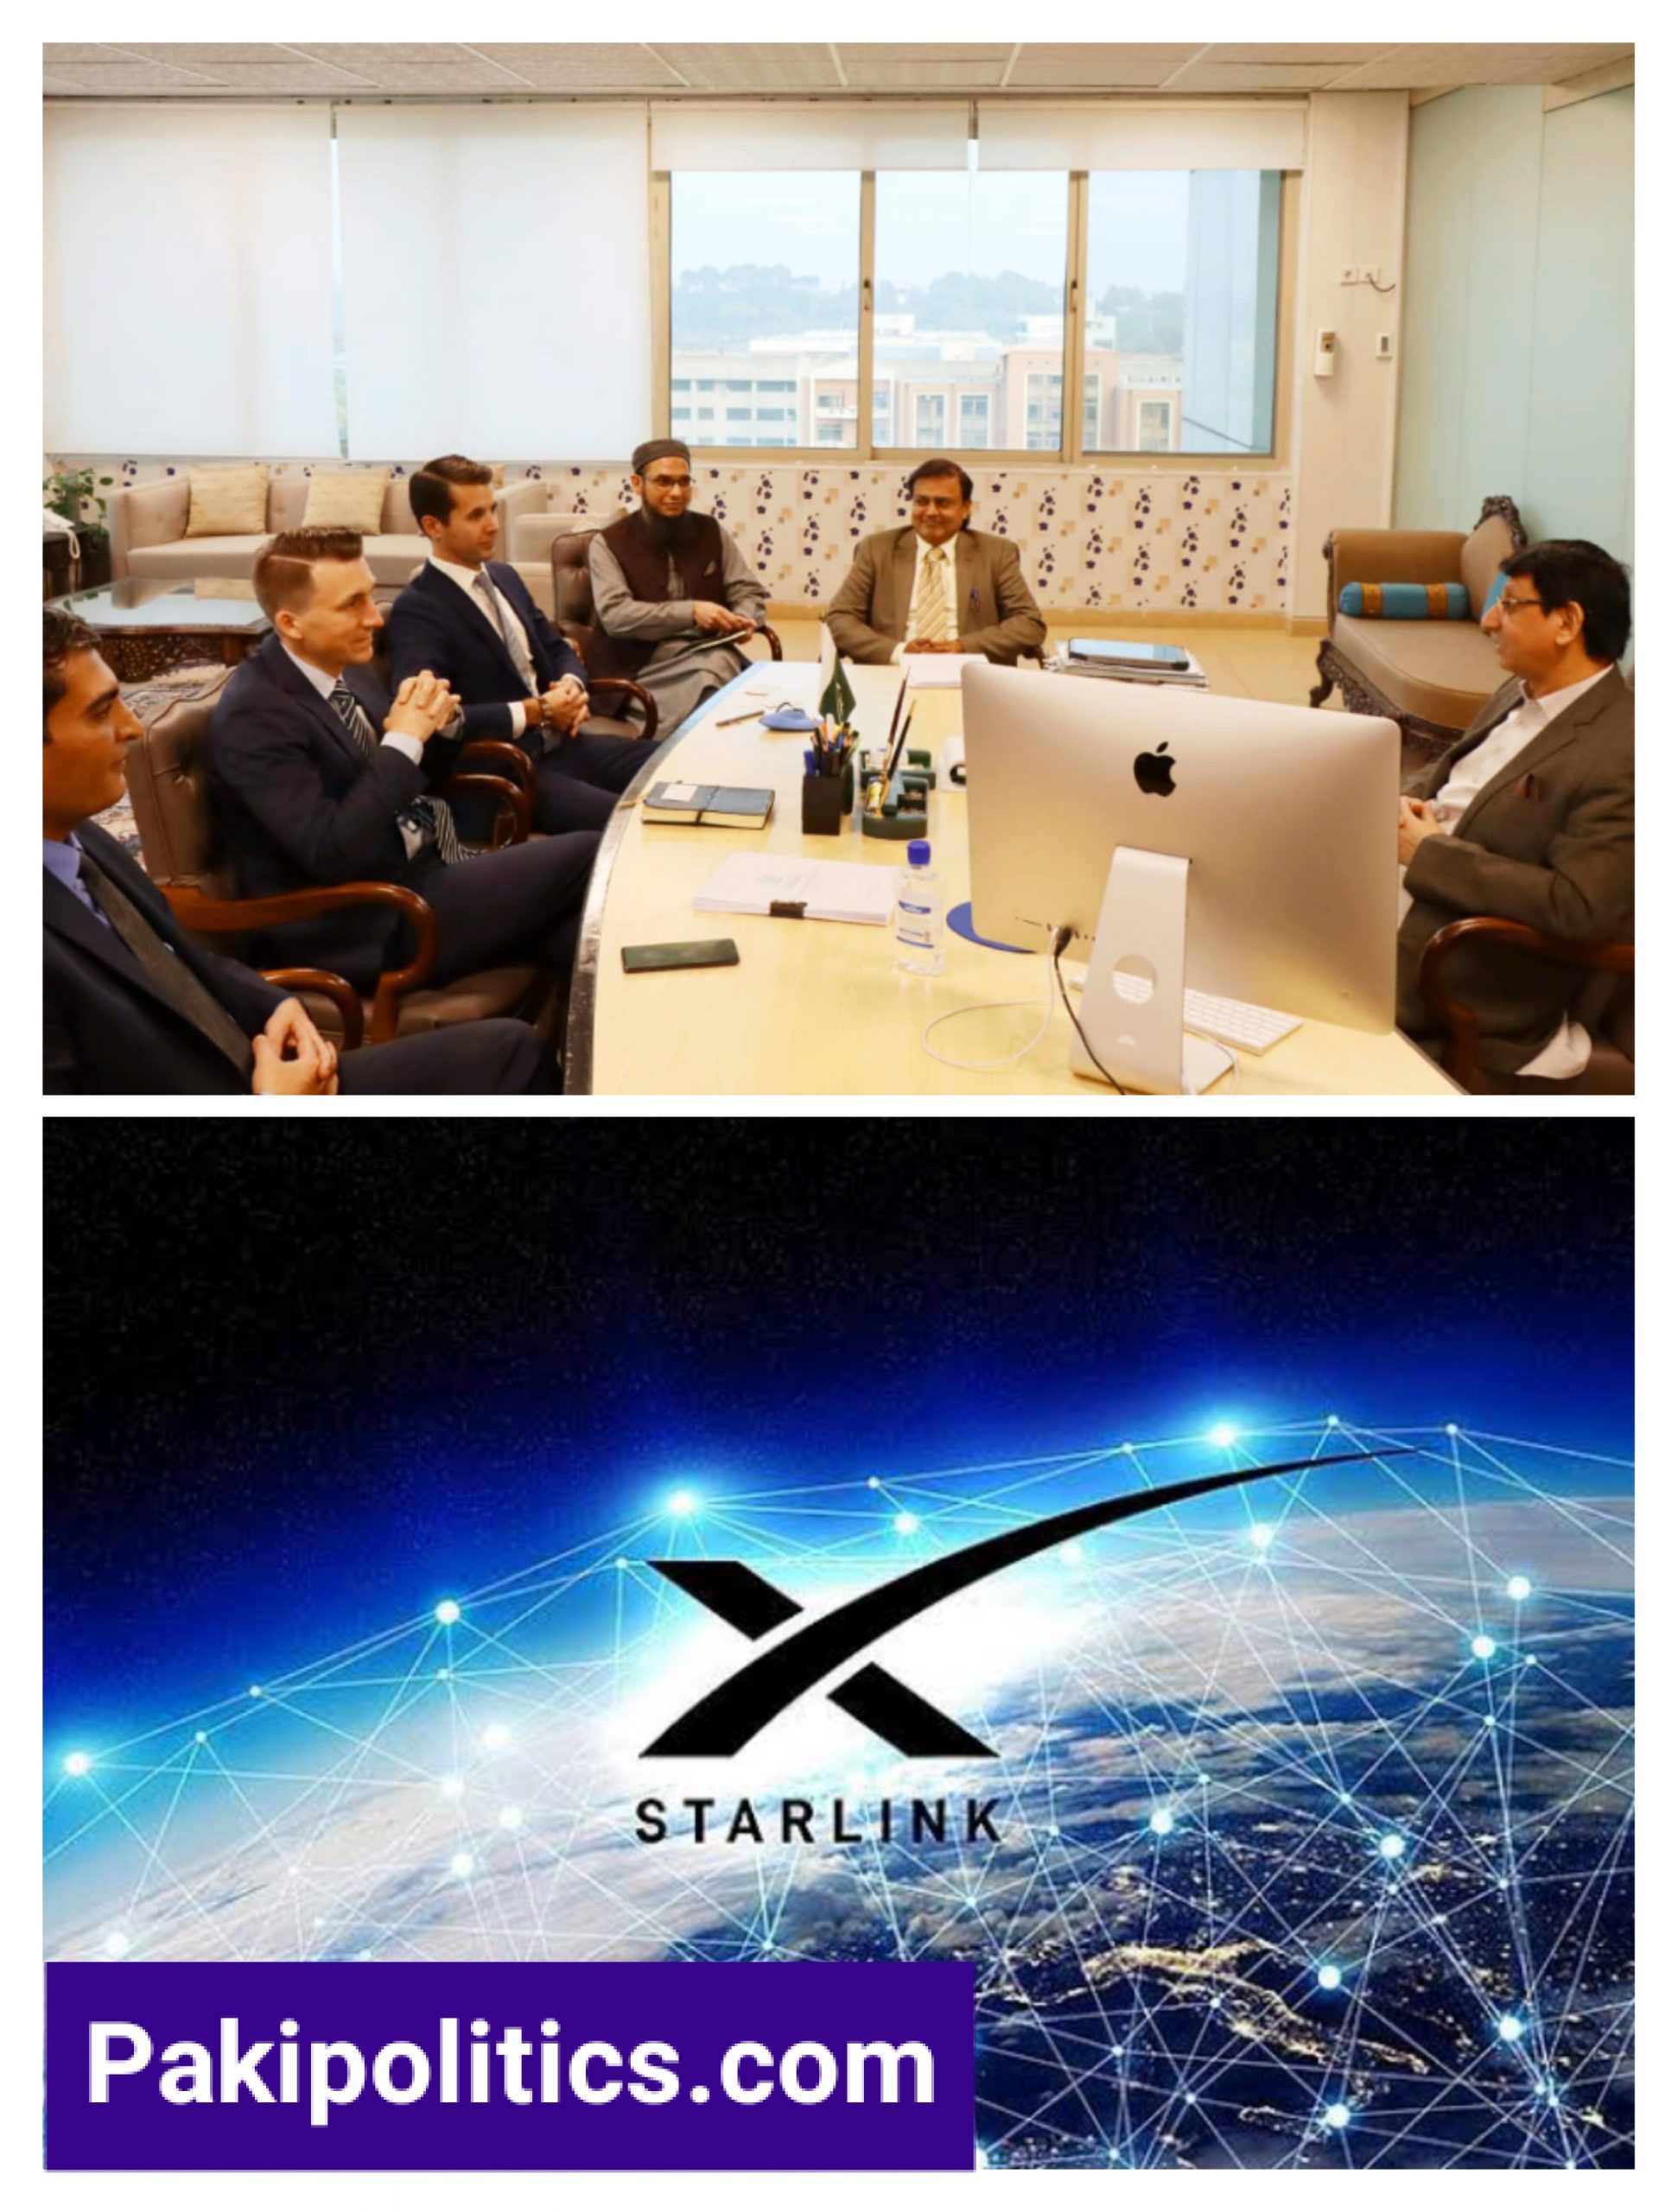 Islamabad American company Starlink has decided to launch satellite broadband services in Pakistan.